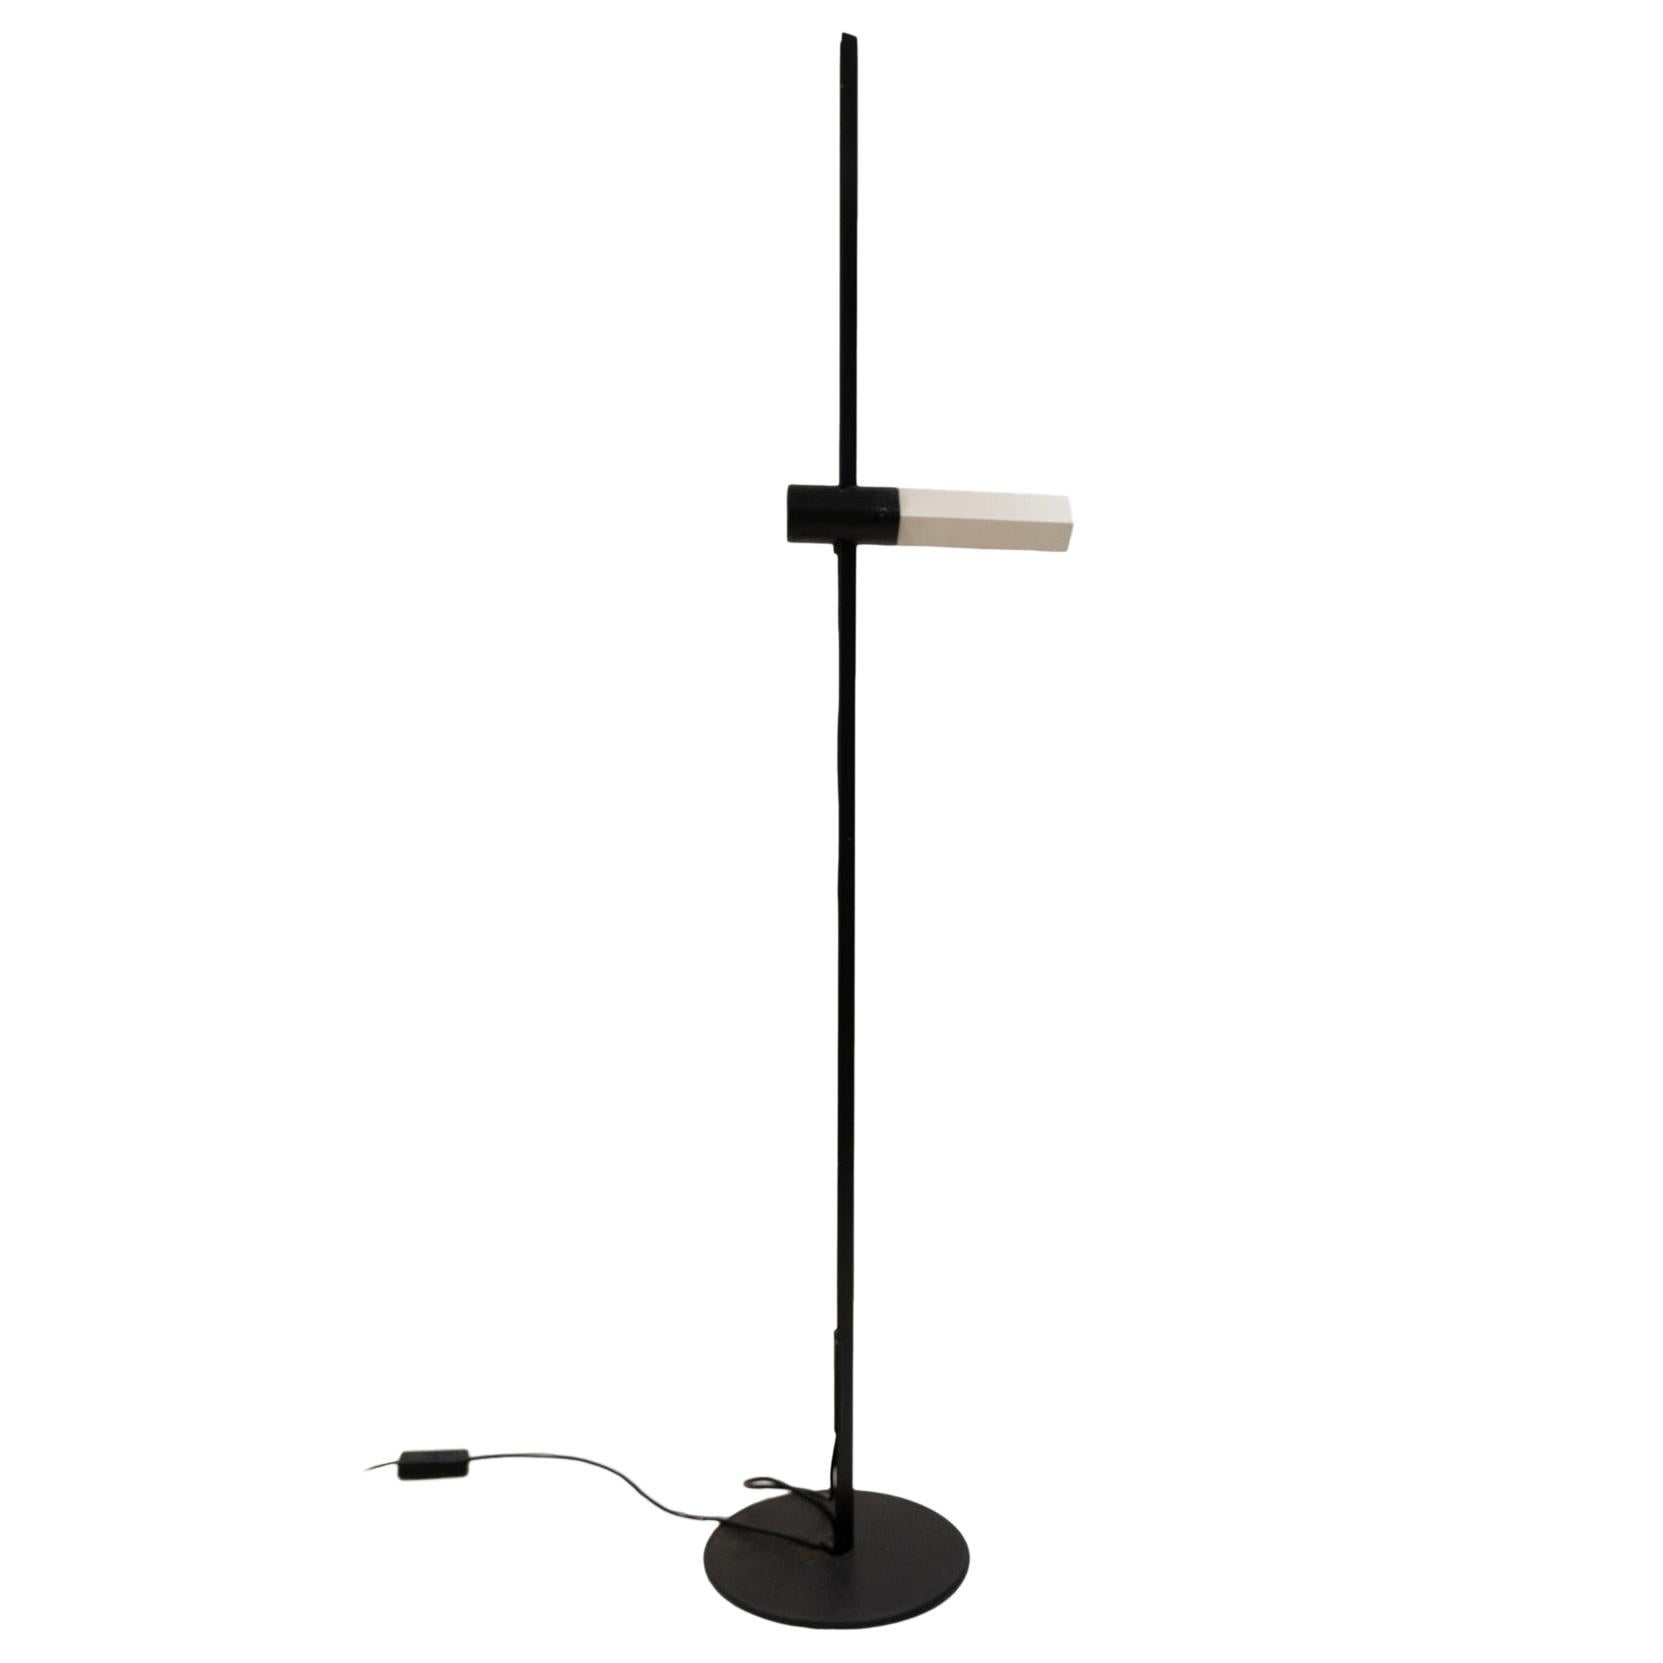 G.F. Frattini for Luci Caltha Adjustable Floor Lamp, Italy, 1982 For Sale